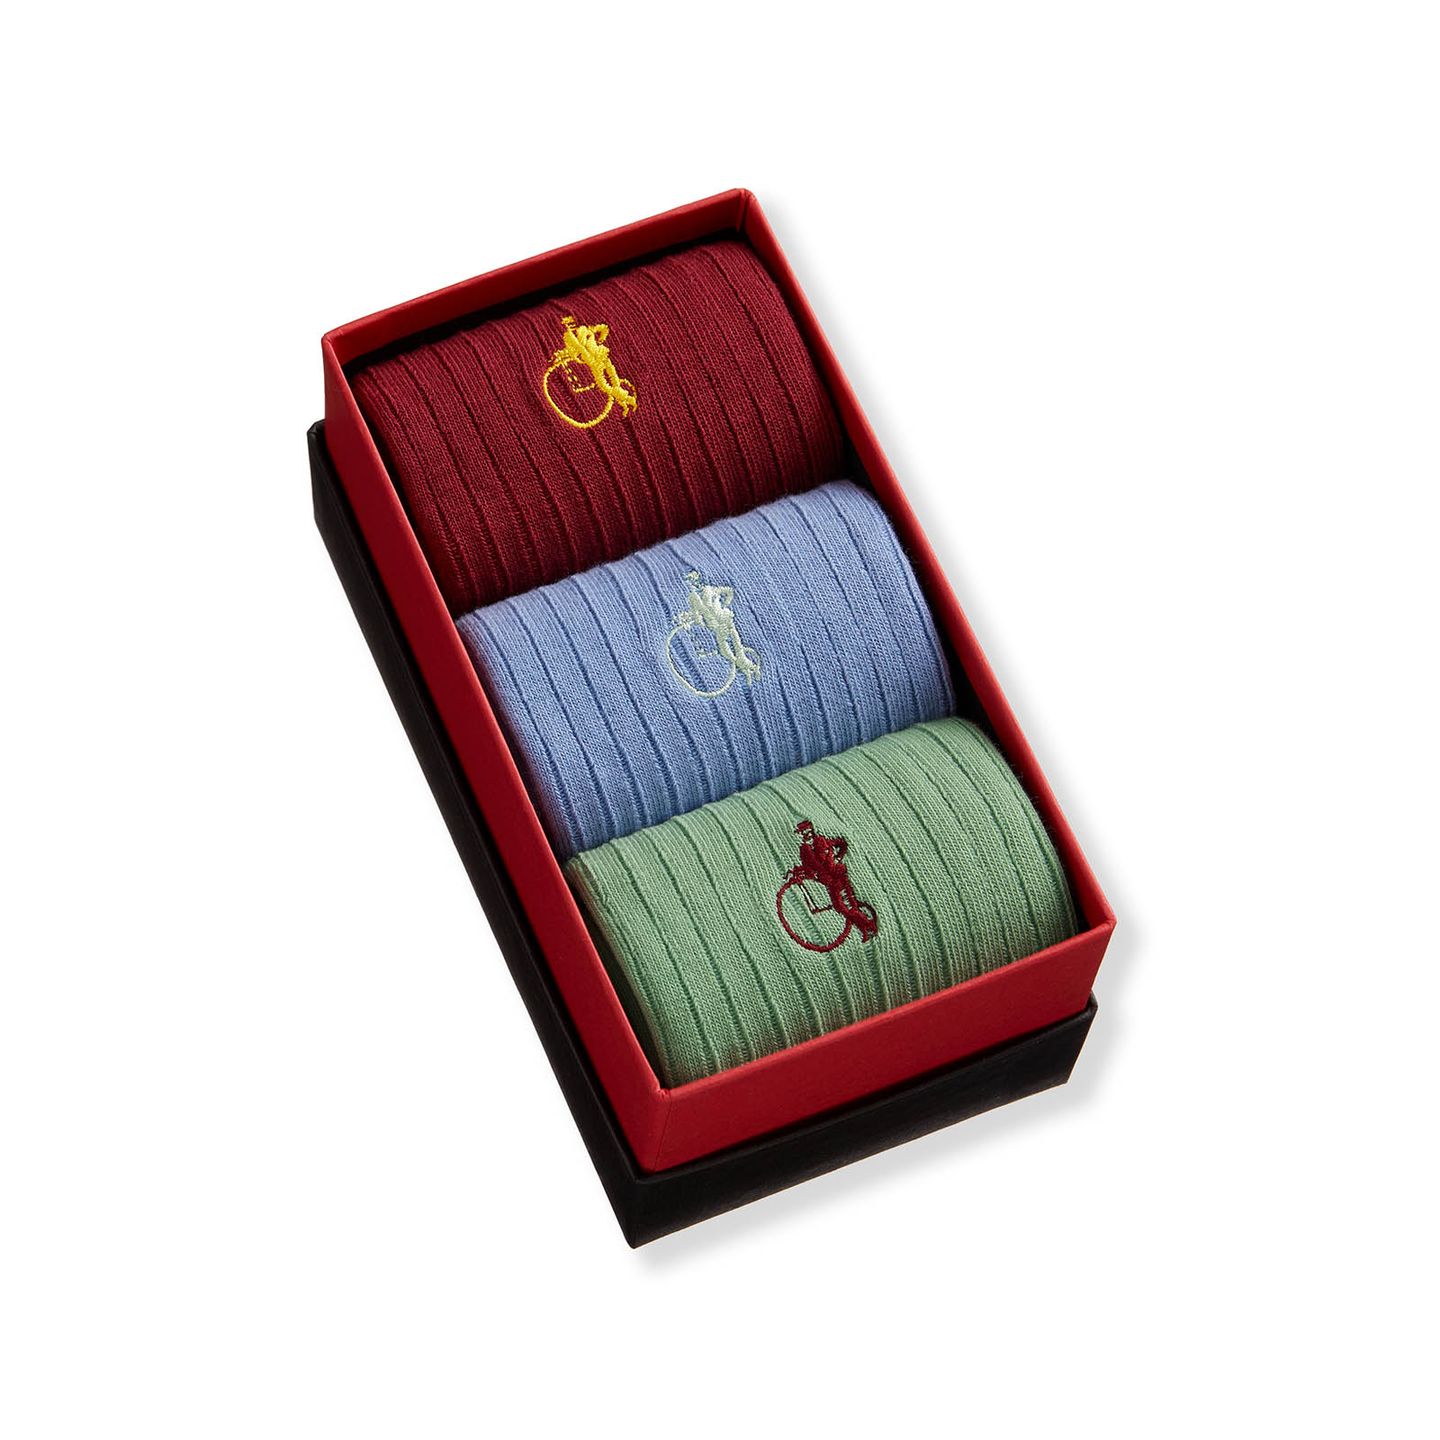 3 pairs of red, light blue and green mens socks in a presentation box